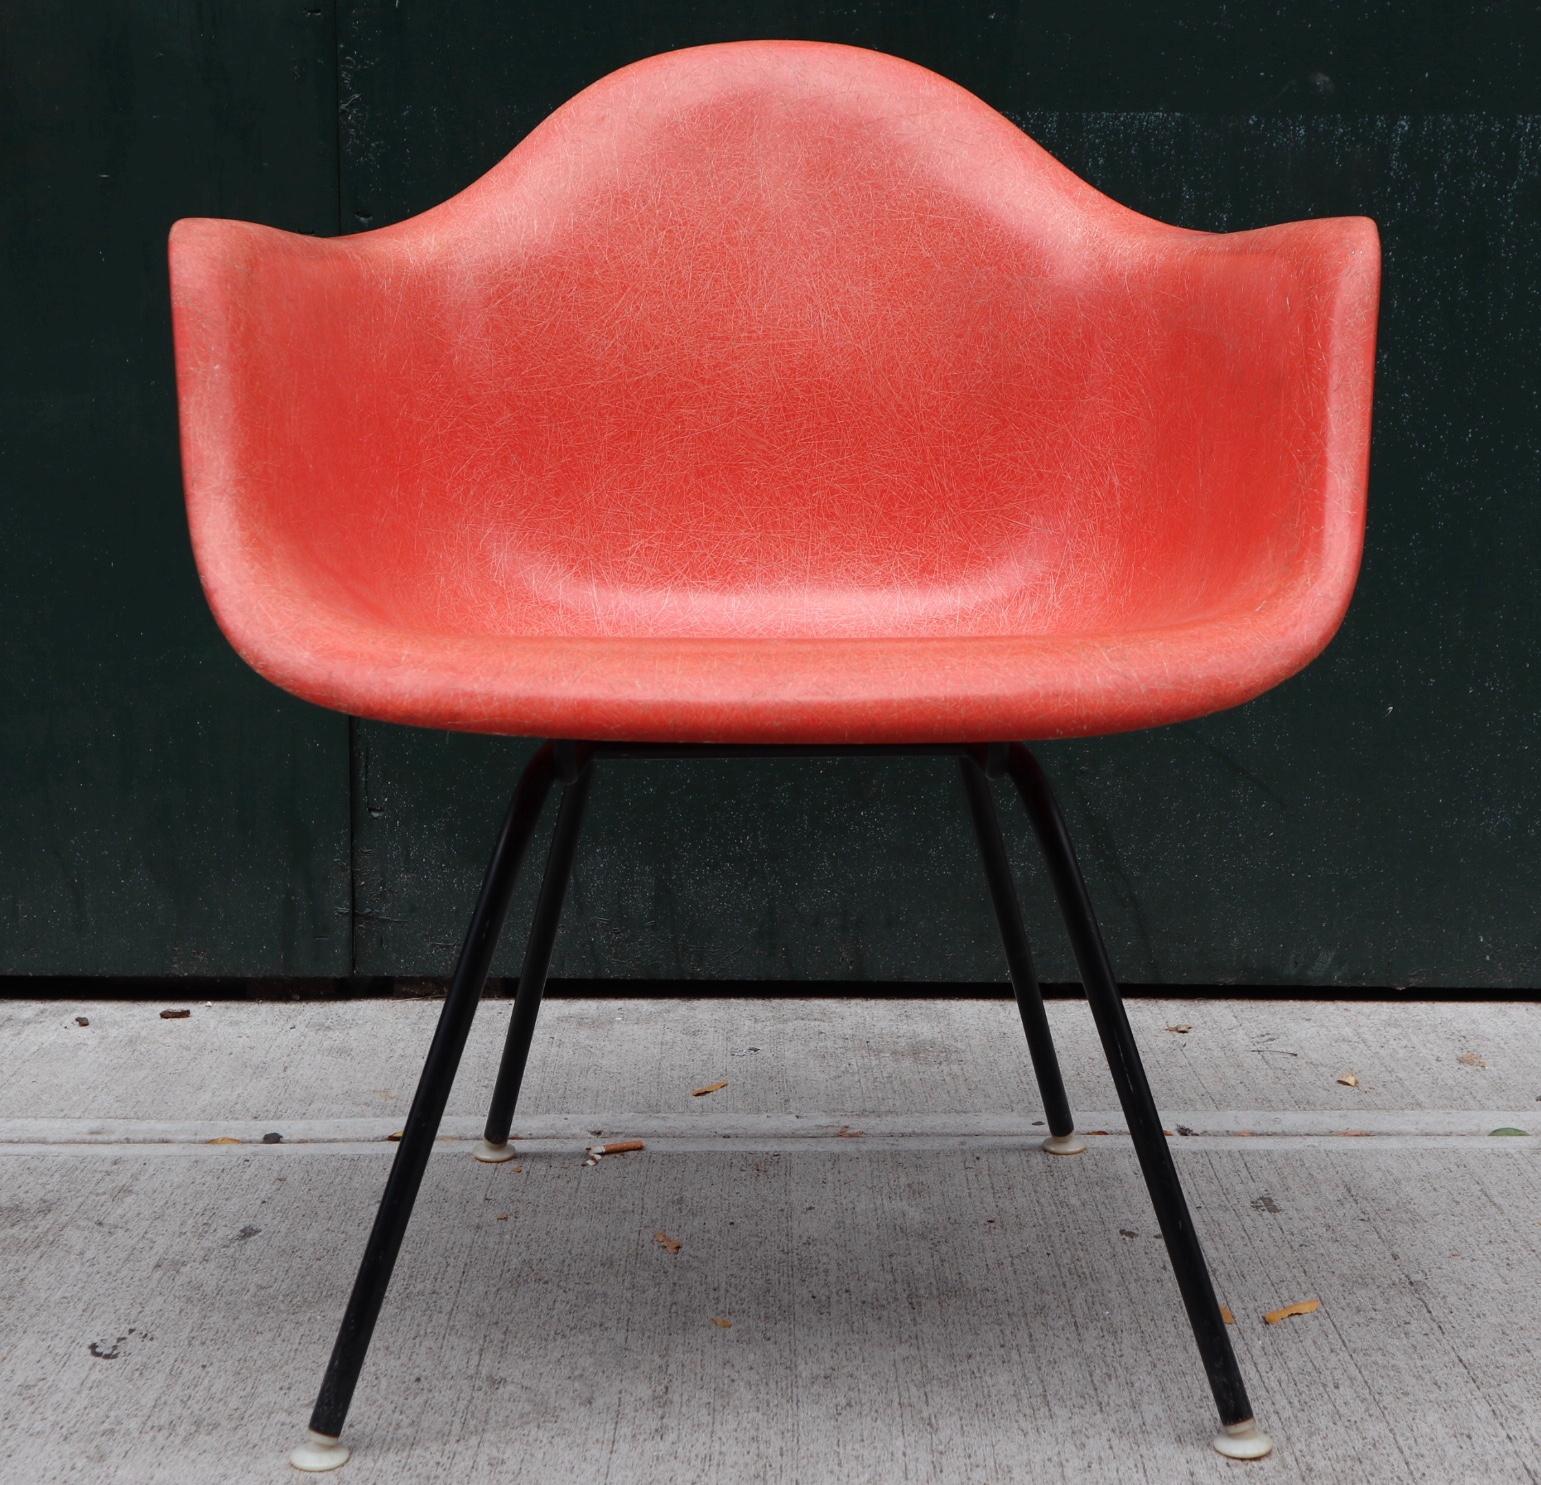 Amazing color on this Eames fiberglass armshell for Herman Miller. Beautiful coral tone contrasts nicely against black lounge height base. No cracks or major wear. Even color throughout. Signed with Herman Miller label underneath the shell. All